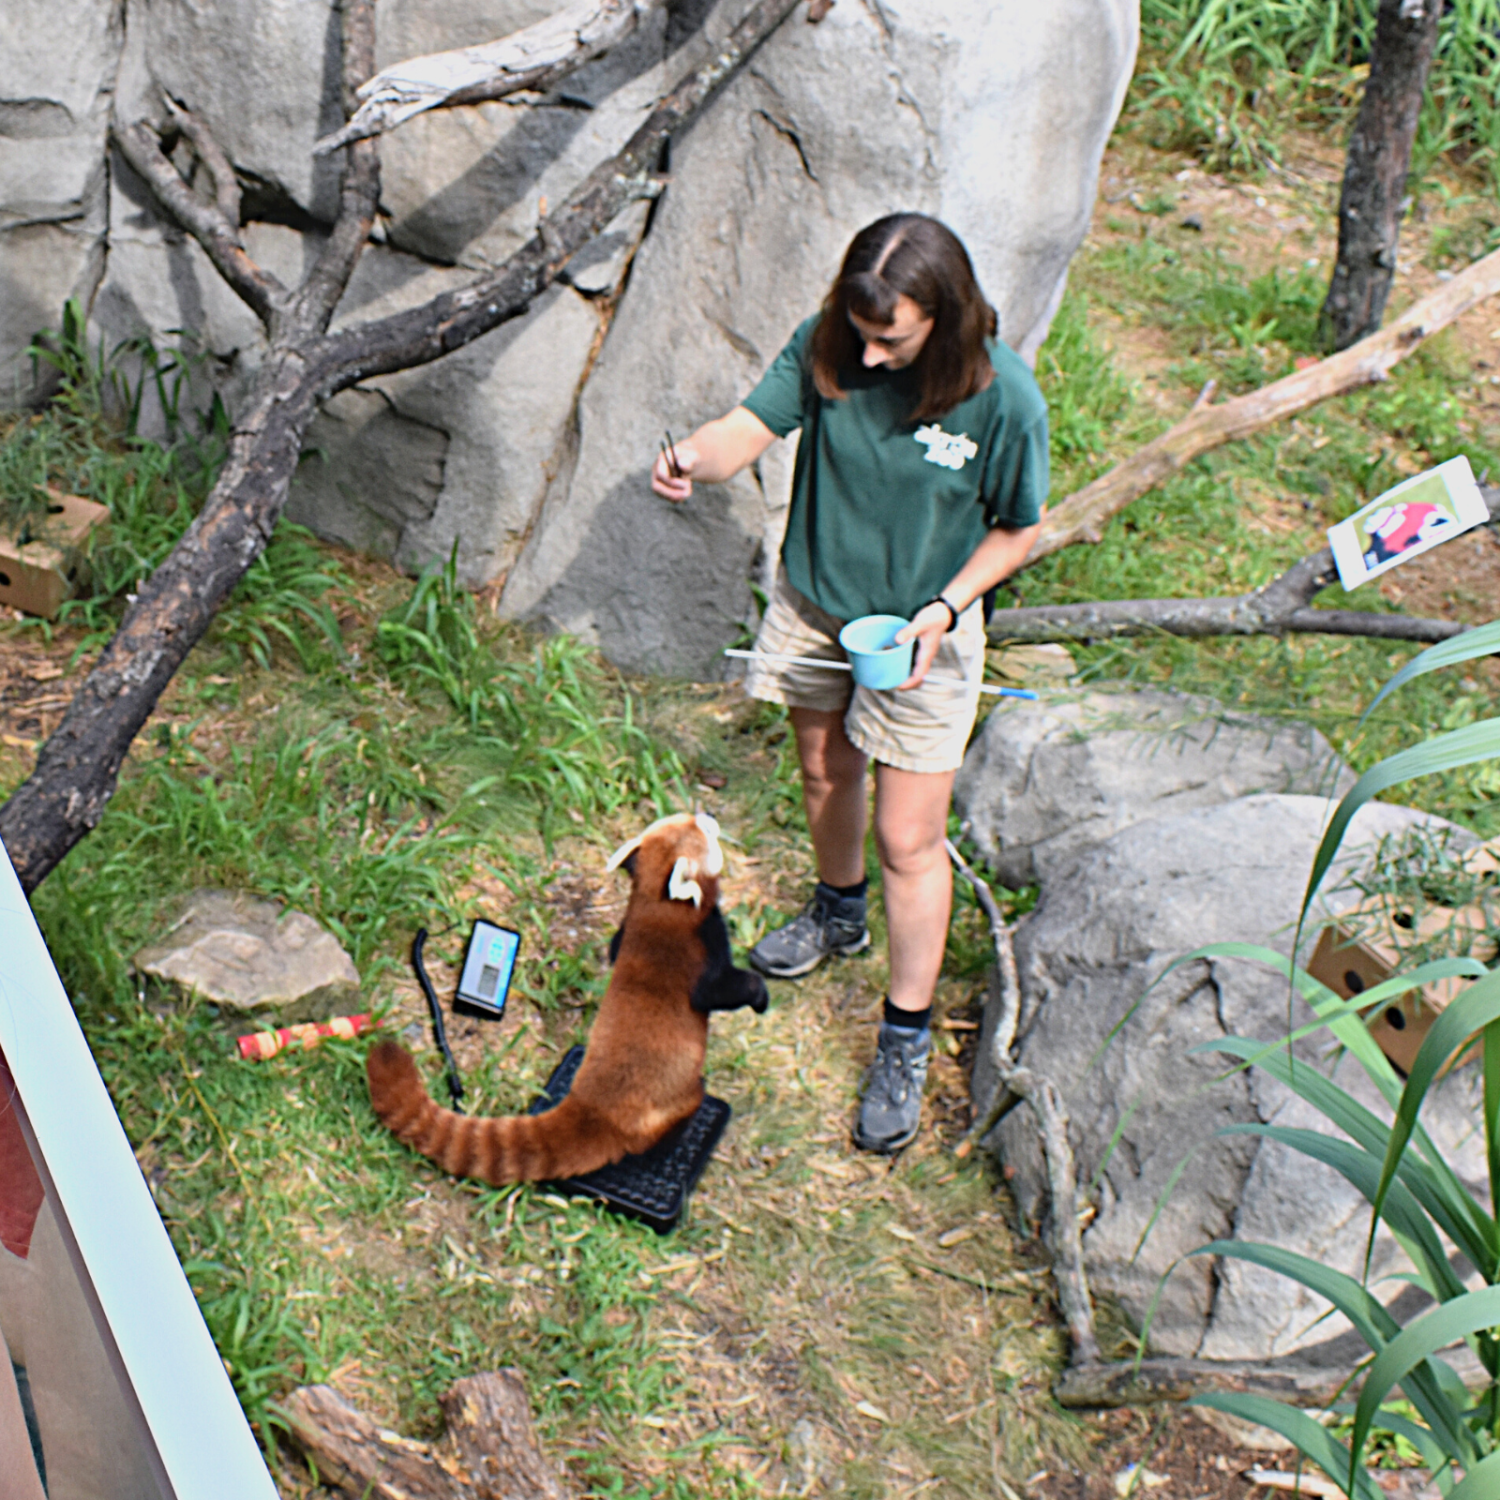 Keeper Lisa doing scale training with red panda